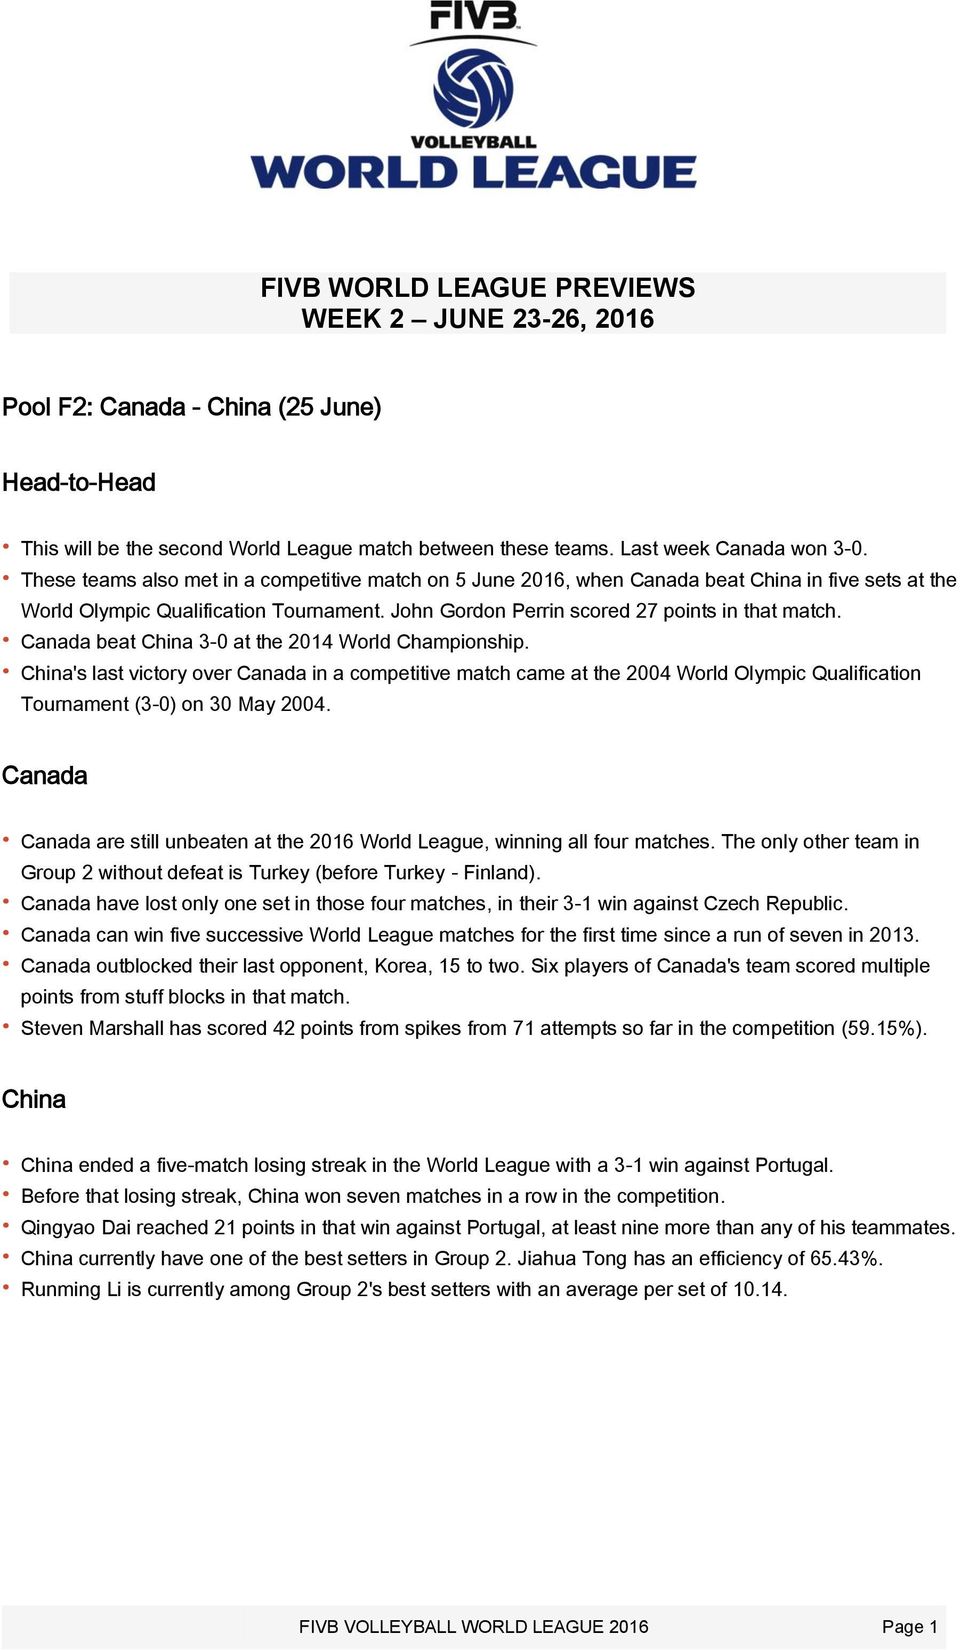 Canada beat China 3-0 at the 2014 World Championship. China's last victory over Canada in a competitive match came at the 2004 World Olympic Qualification Tournament (3-0) on 30 May 2004.